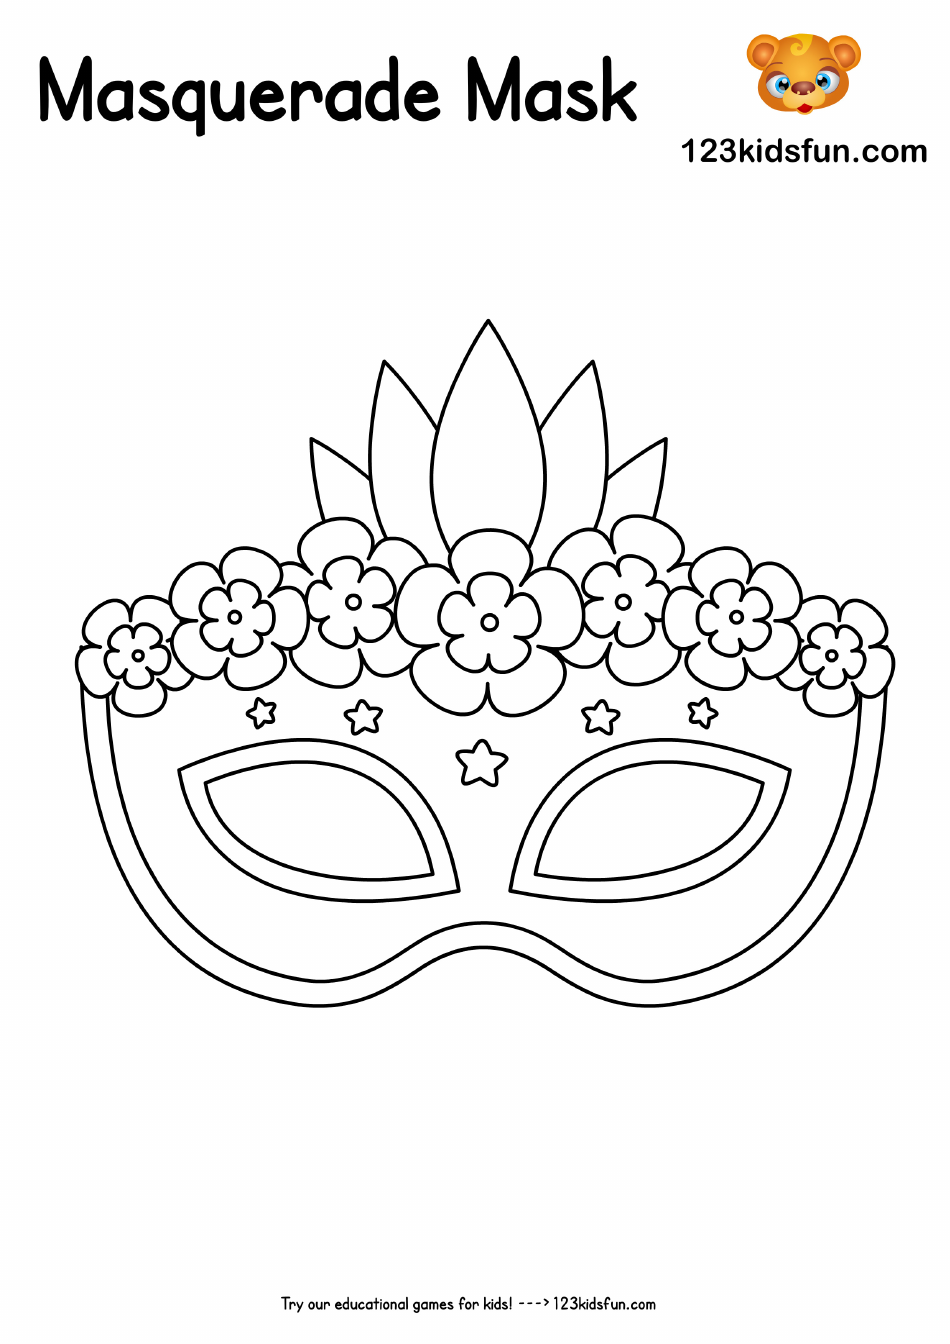 Masquerade Mask Coloring Template - Flowers, Page 1